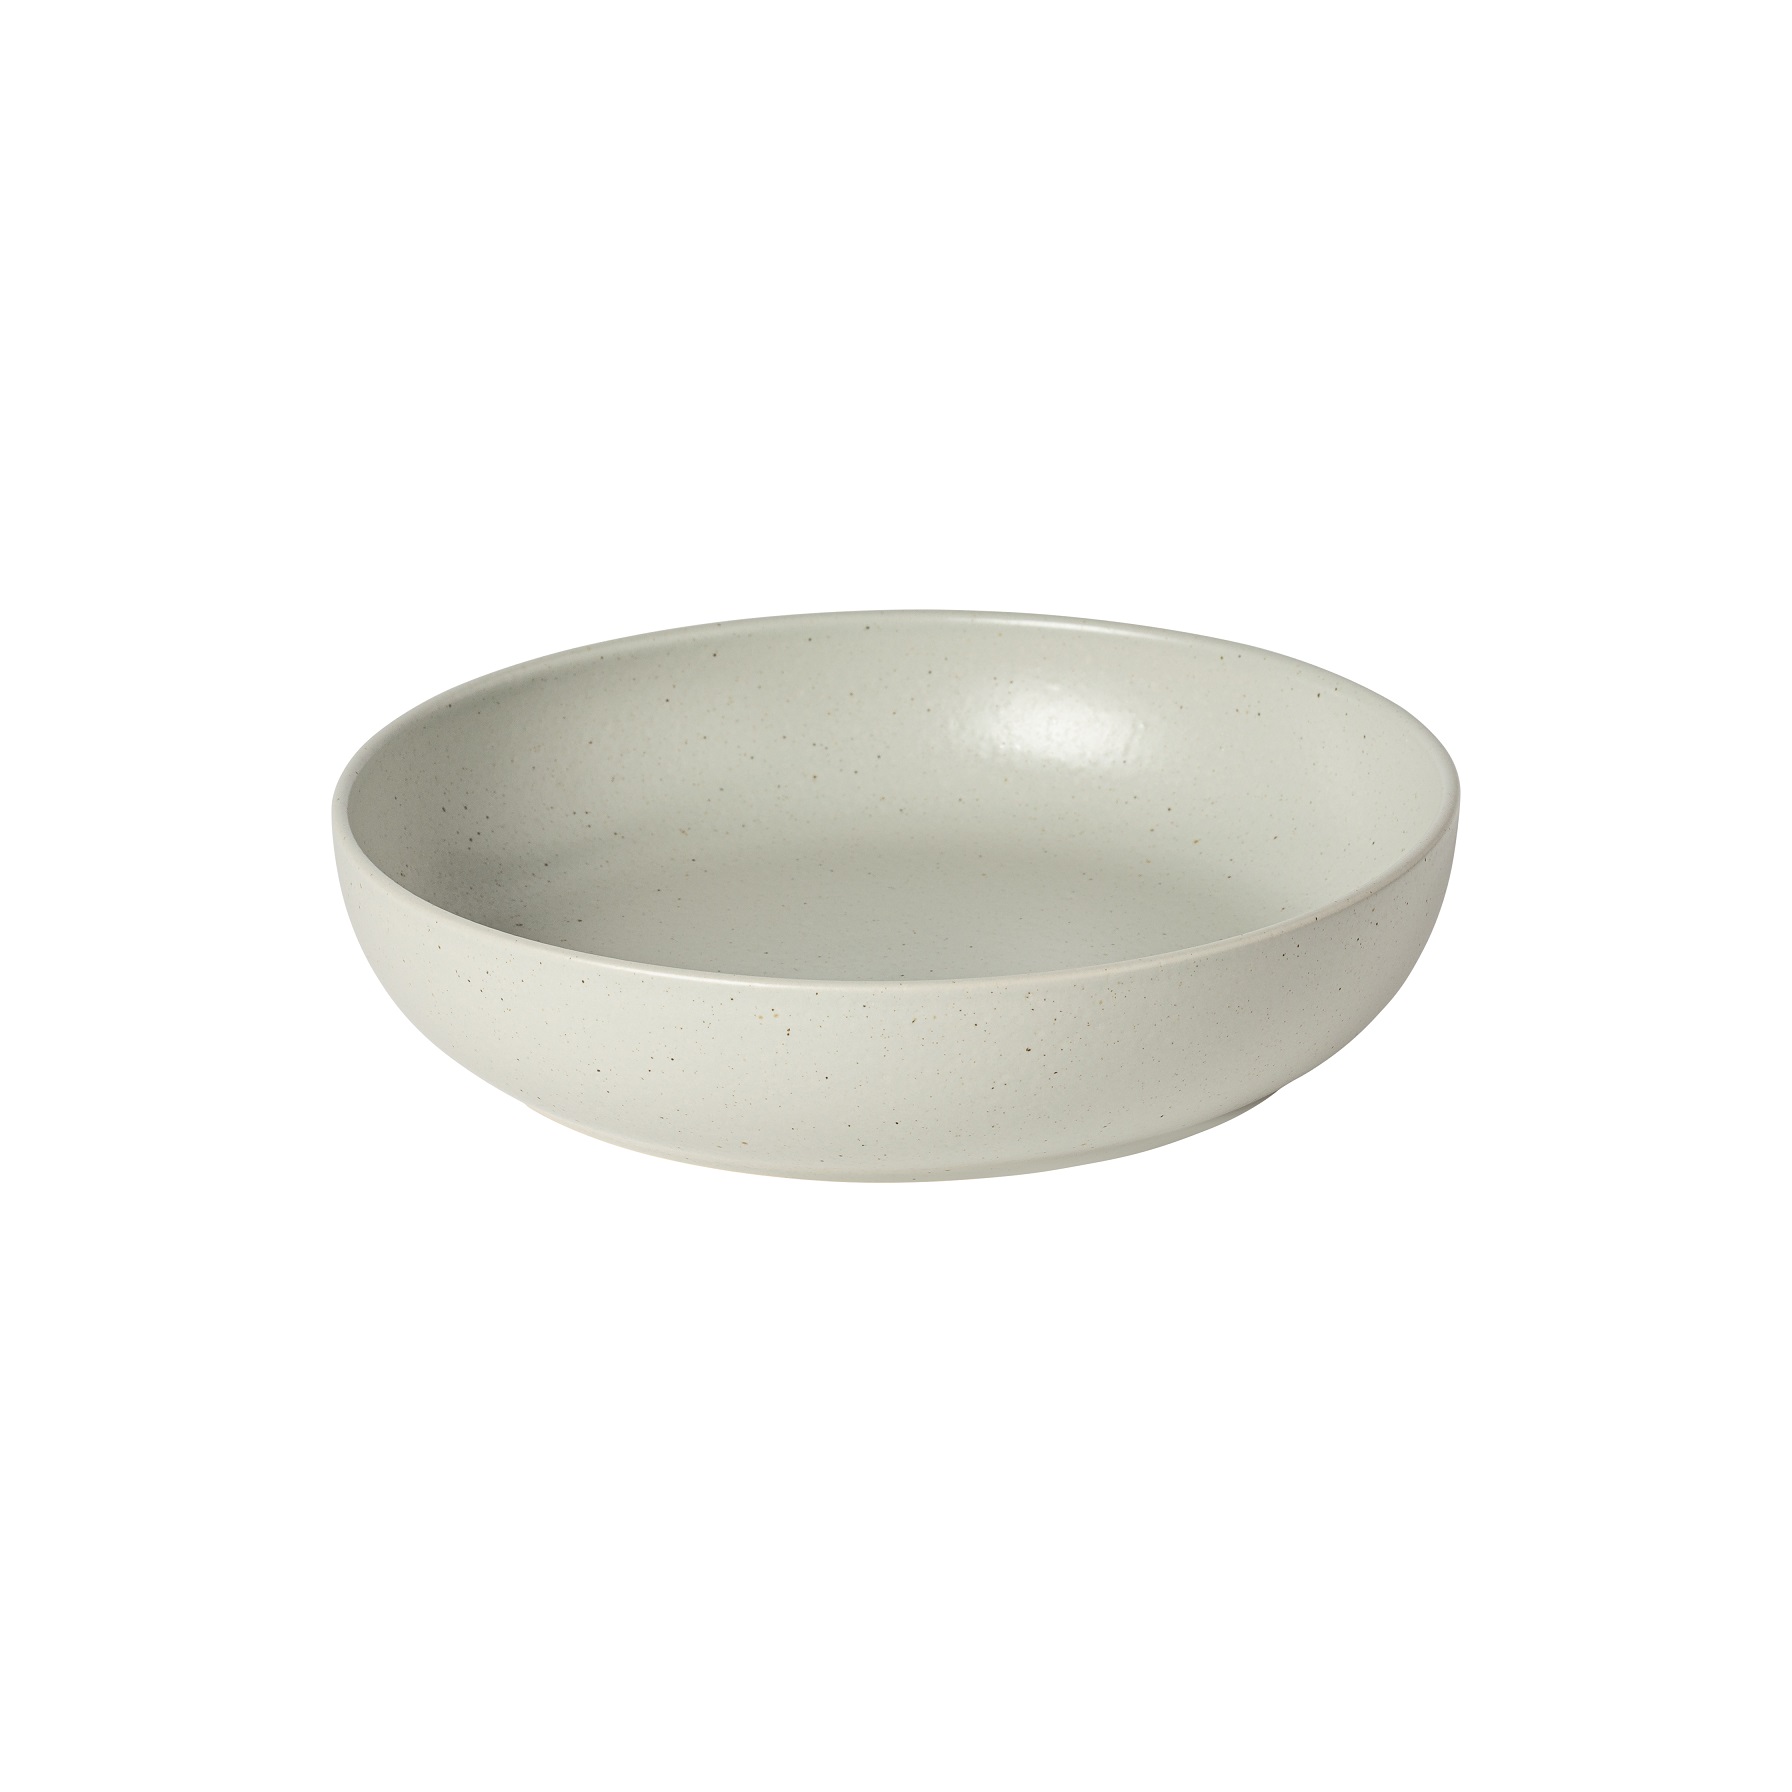 Pacifica Oyster Grey Soup/pasta Bowl 22cm Gift